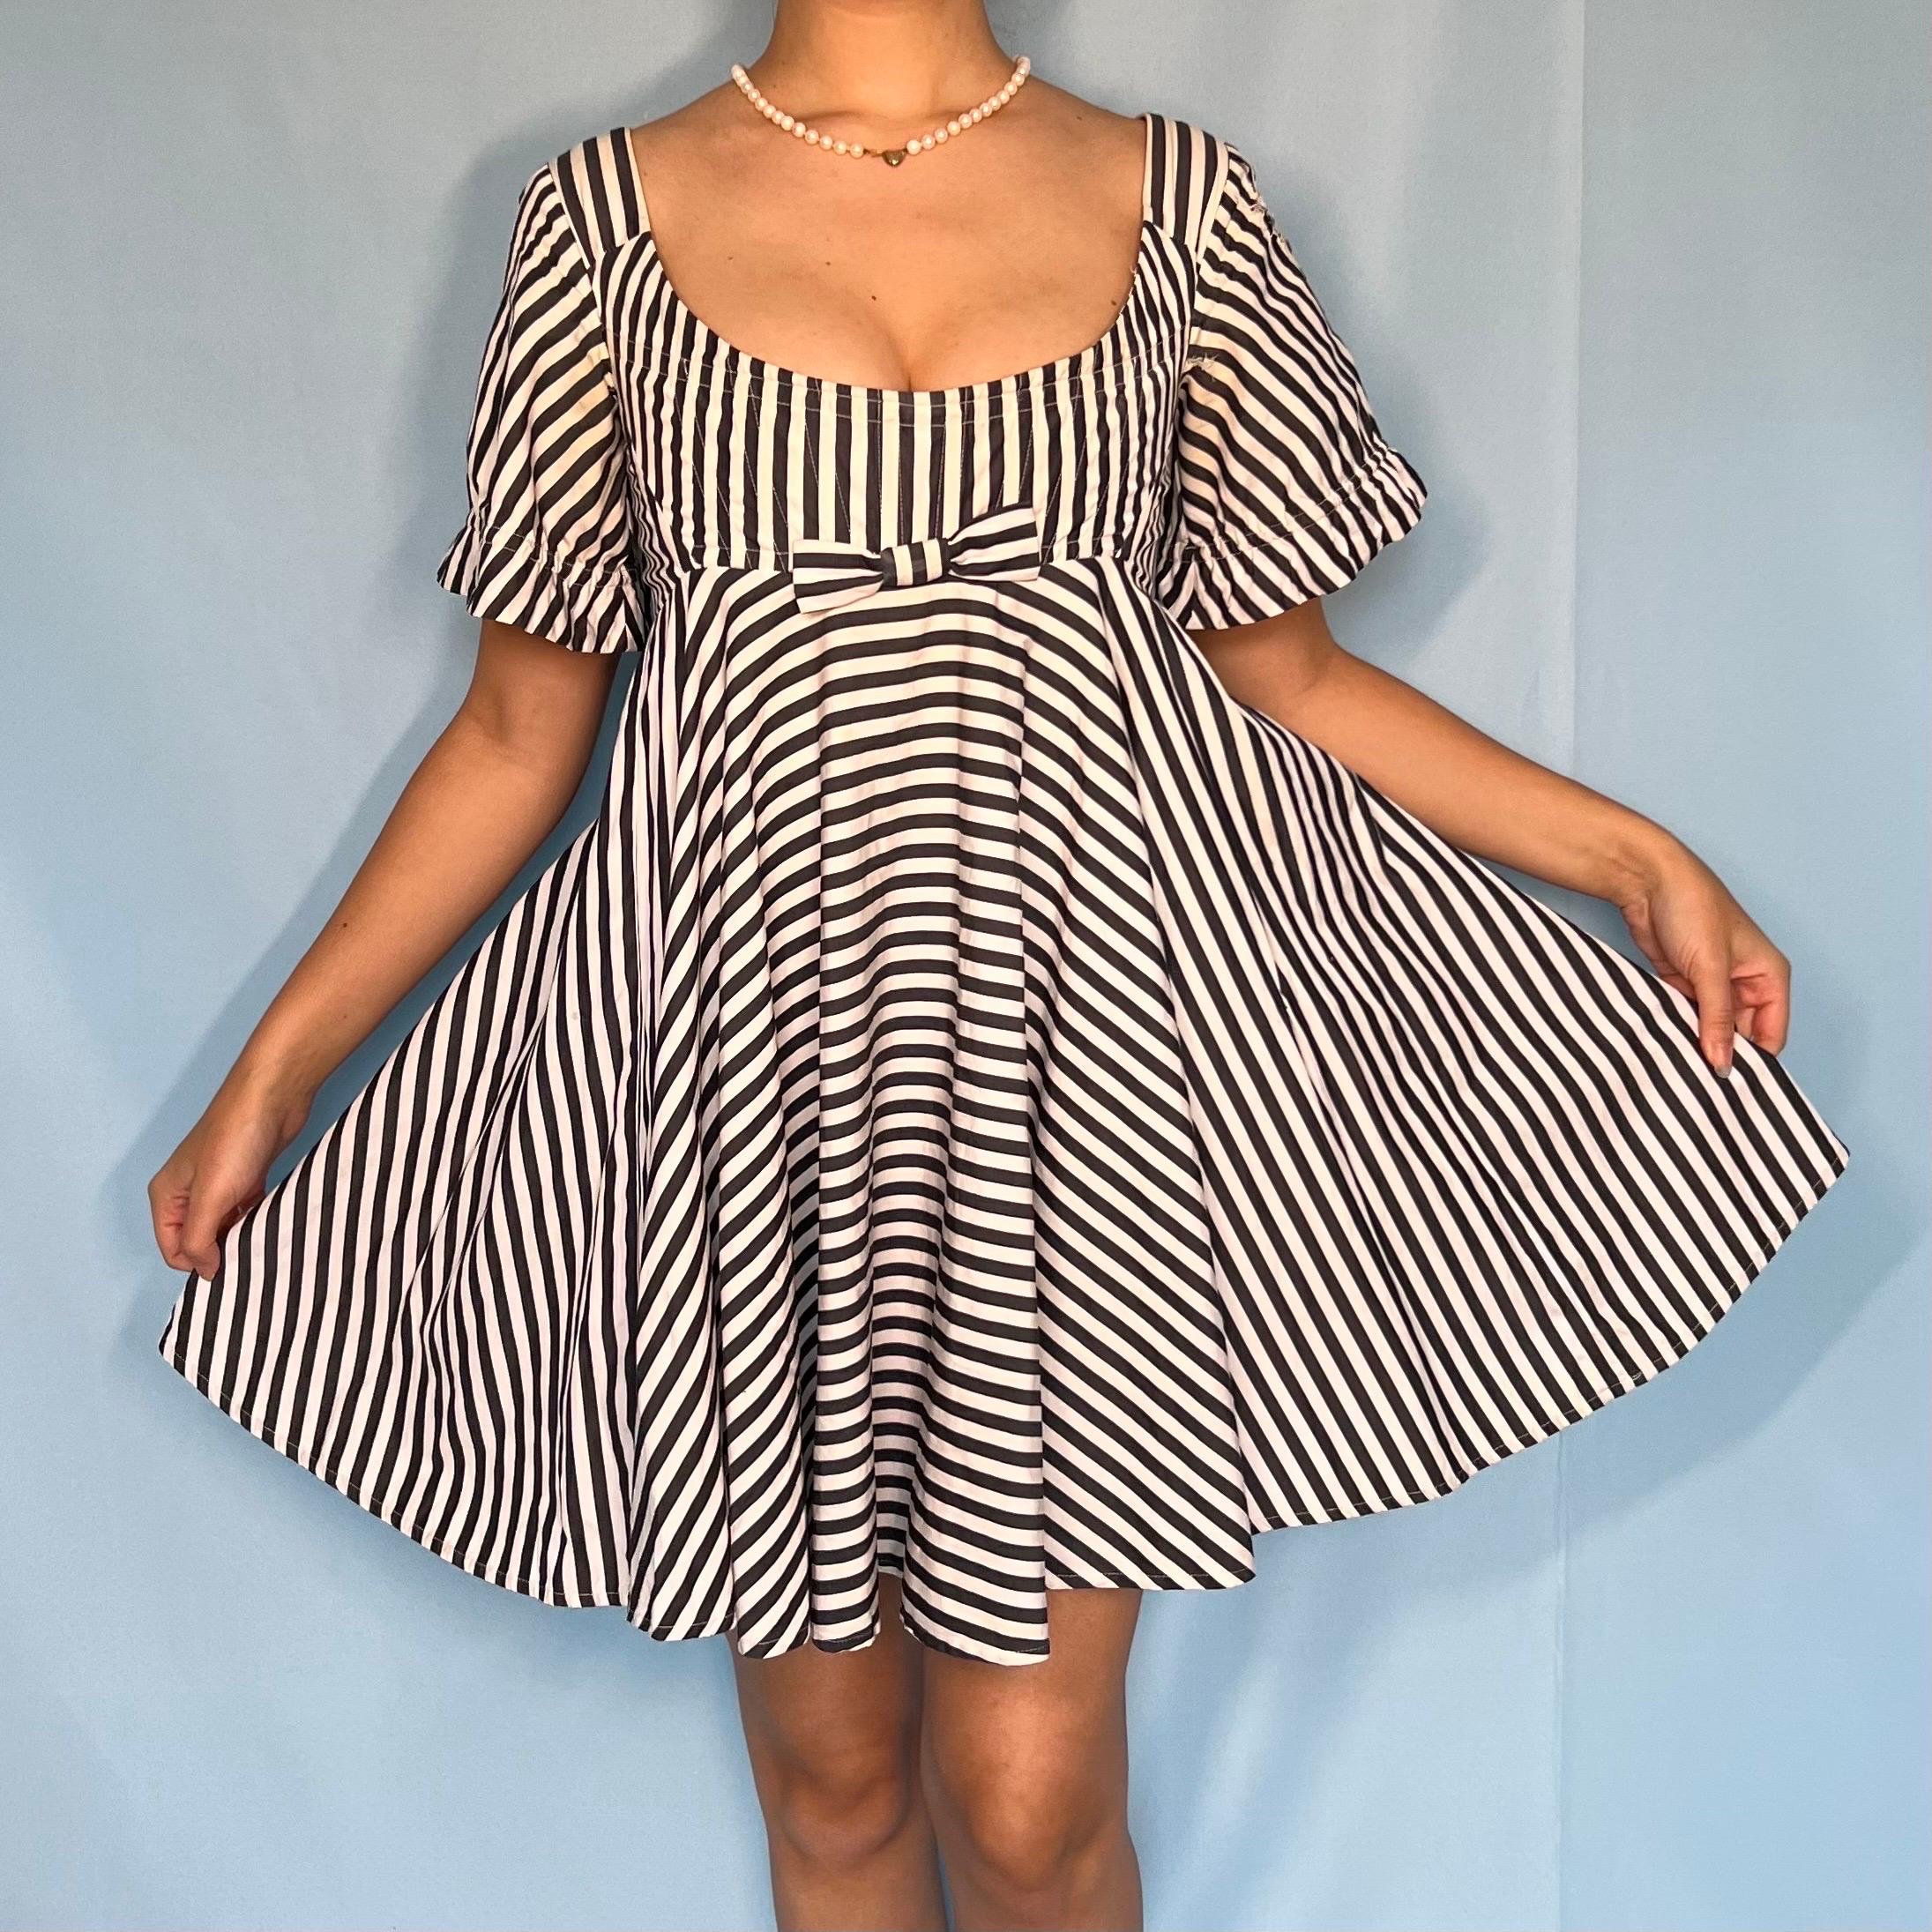 Vintage Vivienne Westwood

From Spring 1992

Black & white striped babydoll corseted dress 

Boned corset top inside dress 

Zip up centre back

Size IT 42 / UK 10 / US 6 

Measurements -

Bust of boned corset - 32” 

Length from centre neckline to